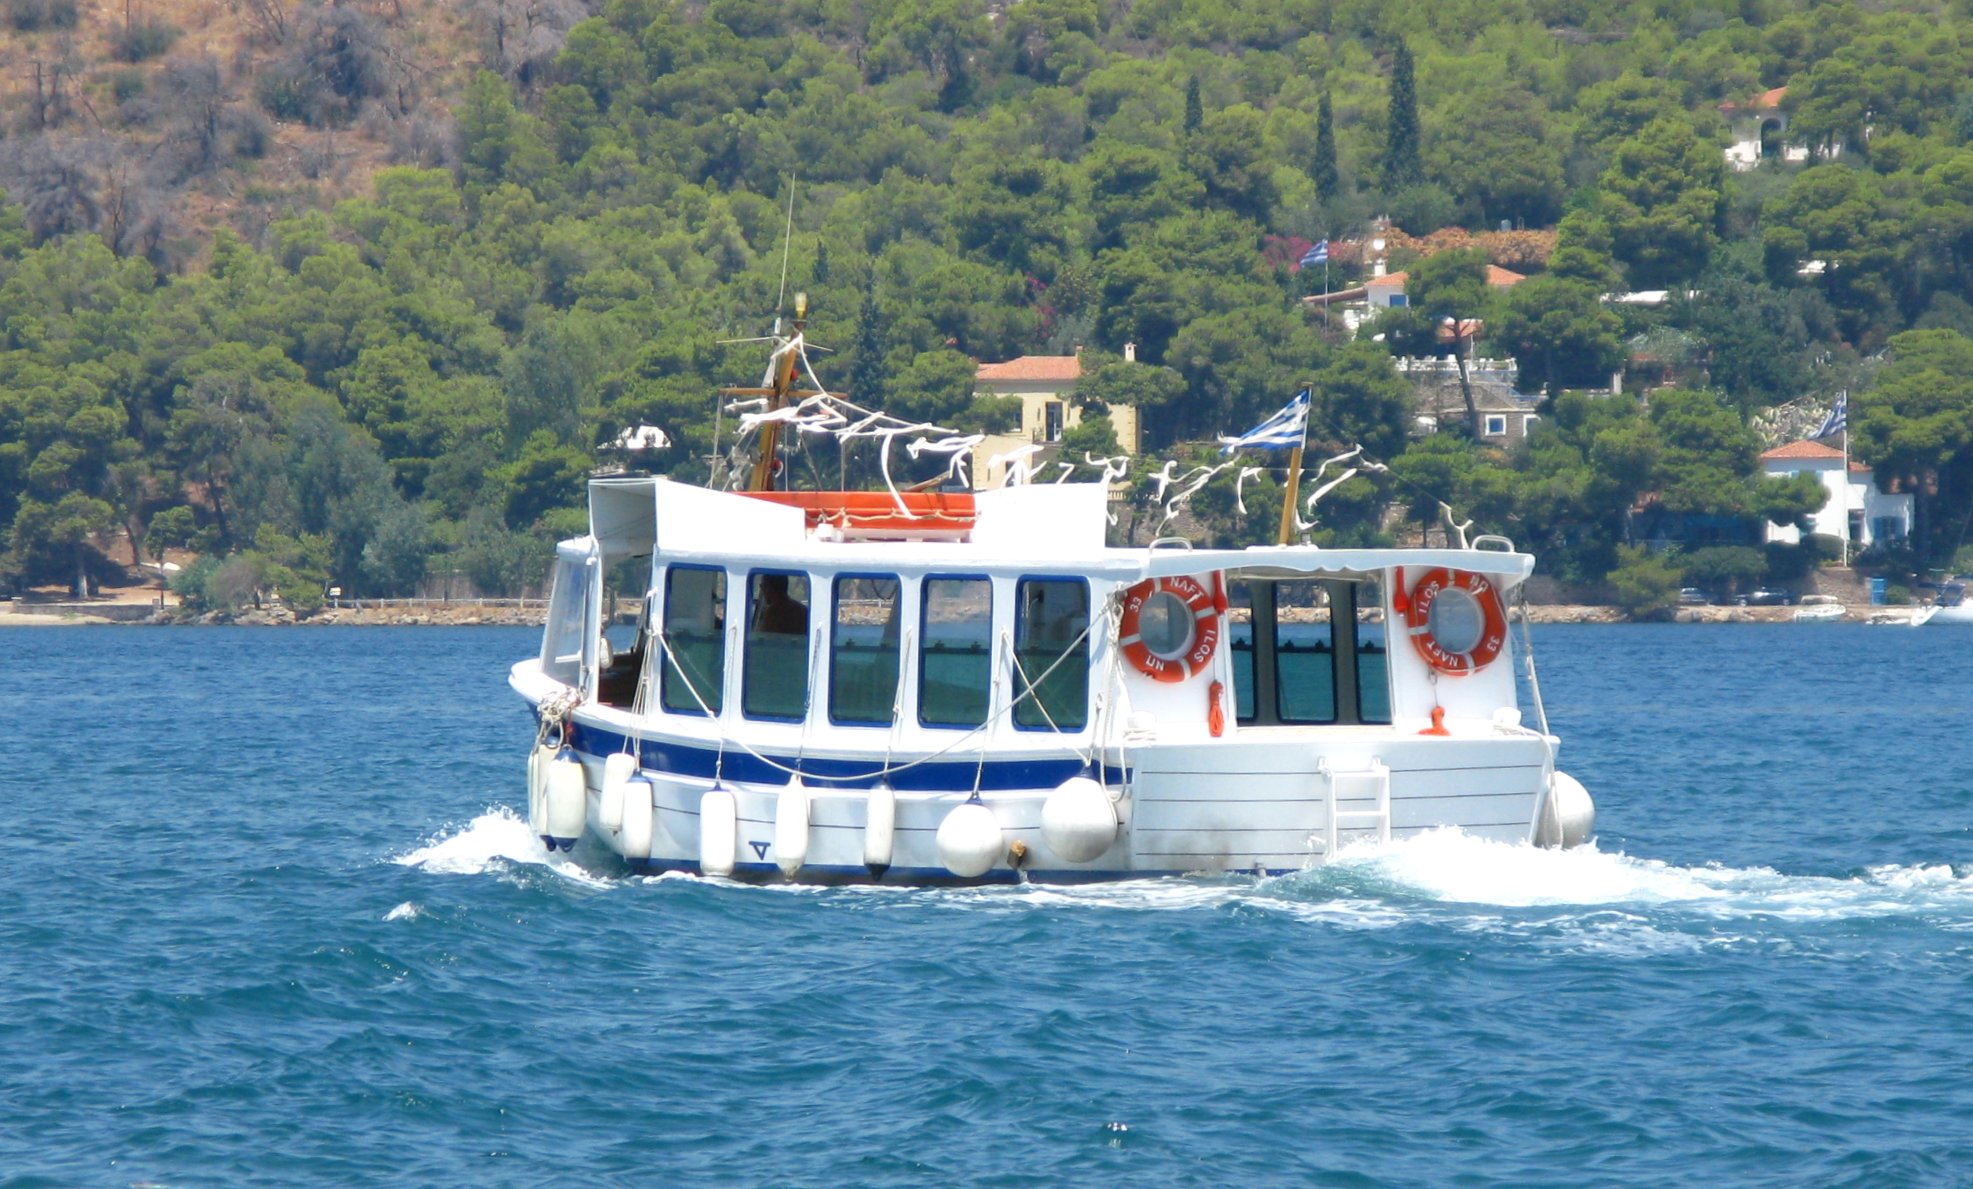 File:Boat ride from Poros to Galatas.jpg - Wikimedia Commons